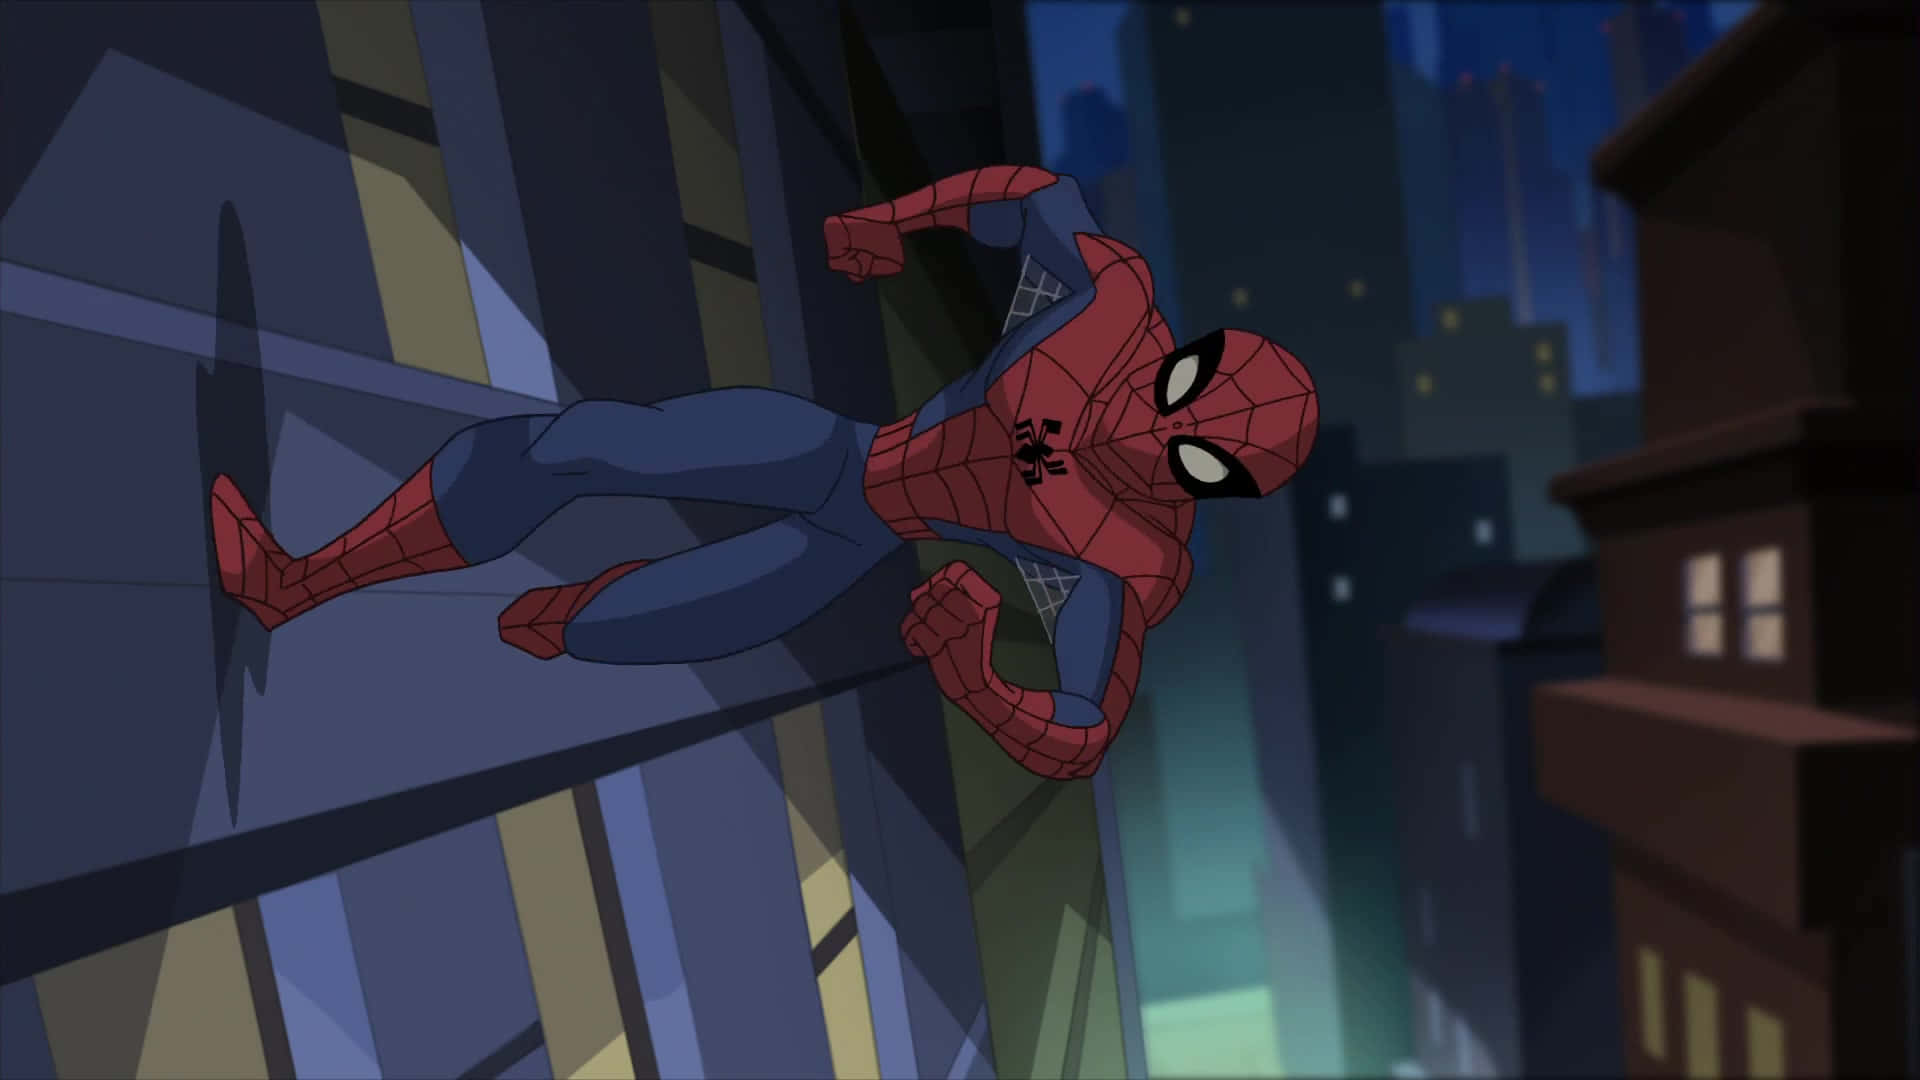 The Spectacular Spider-man On The Wall Wallpaper